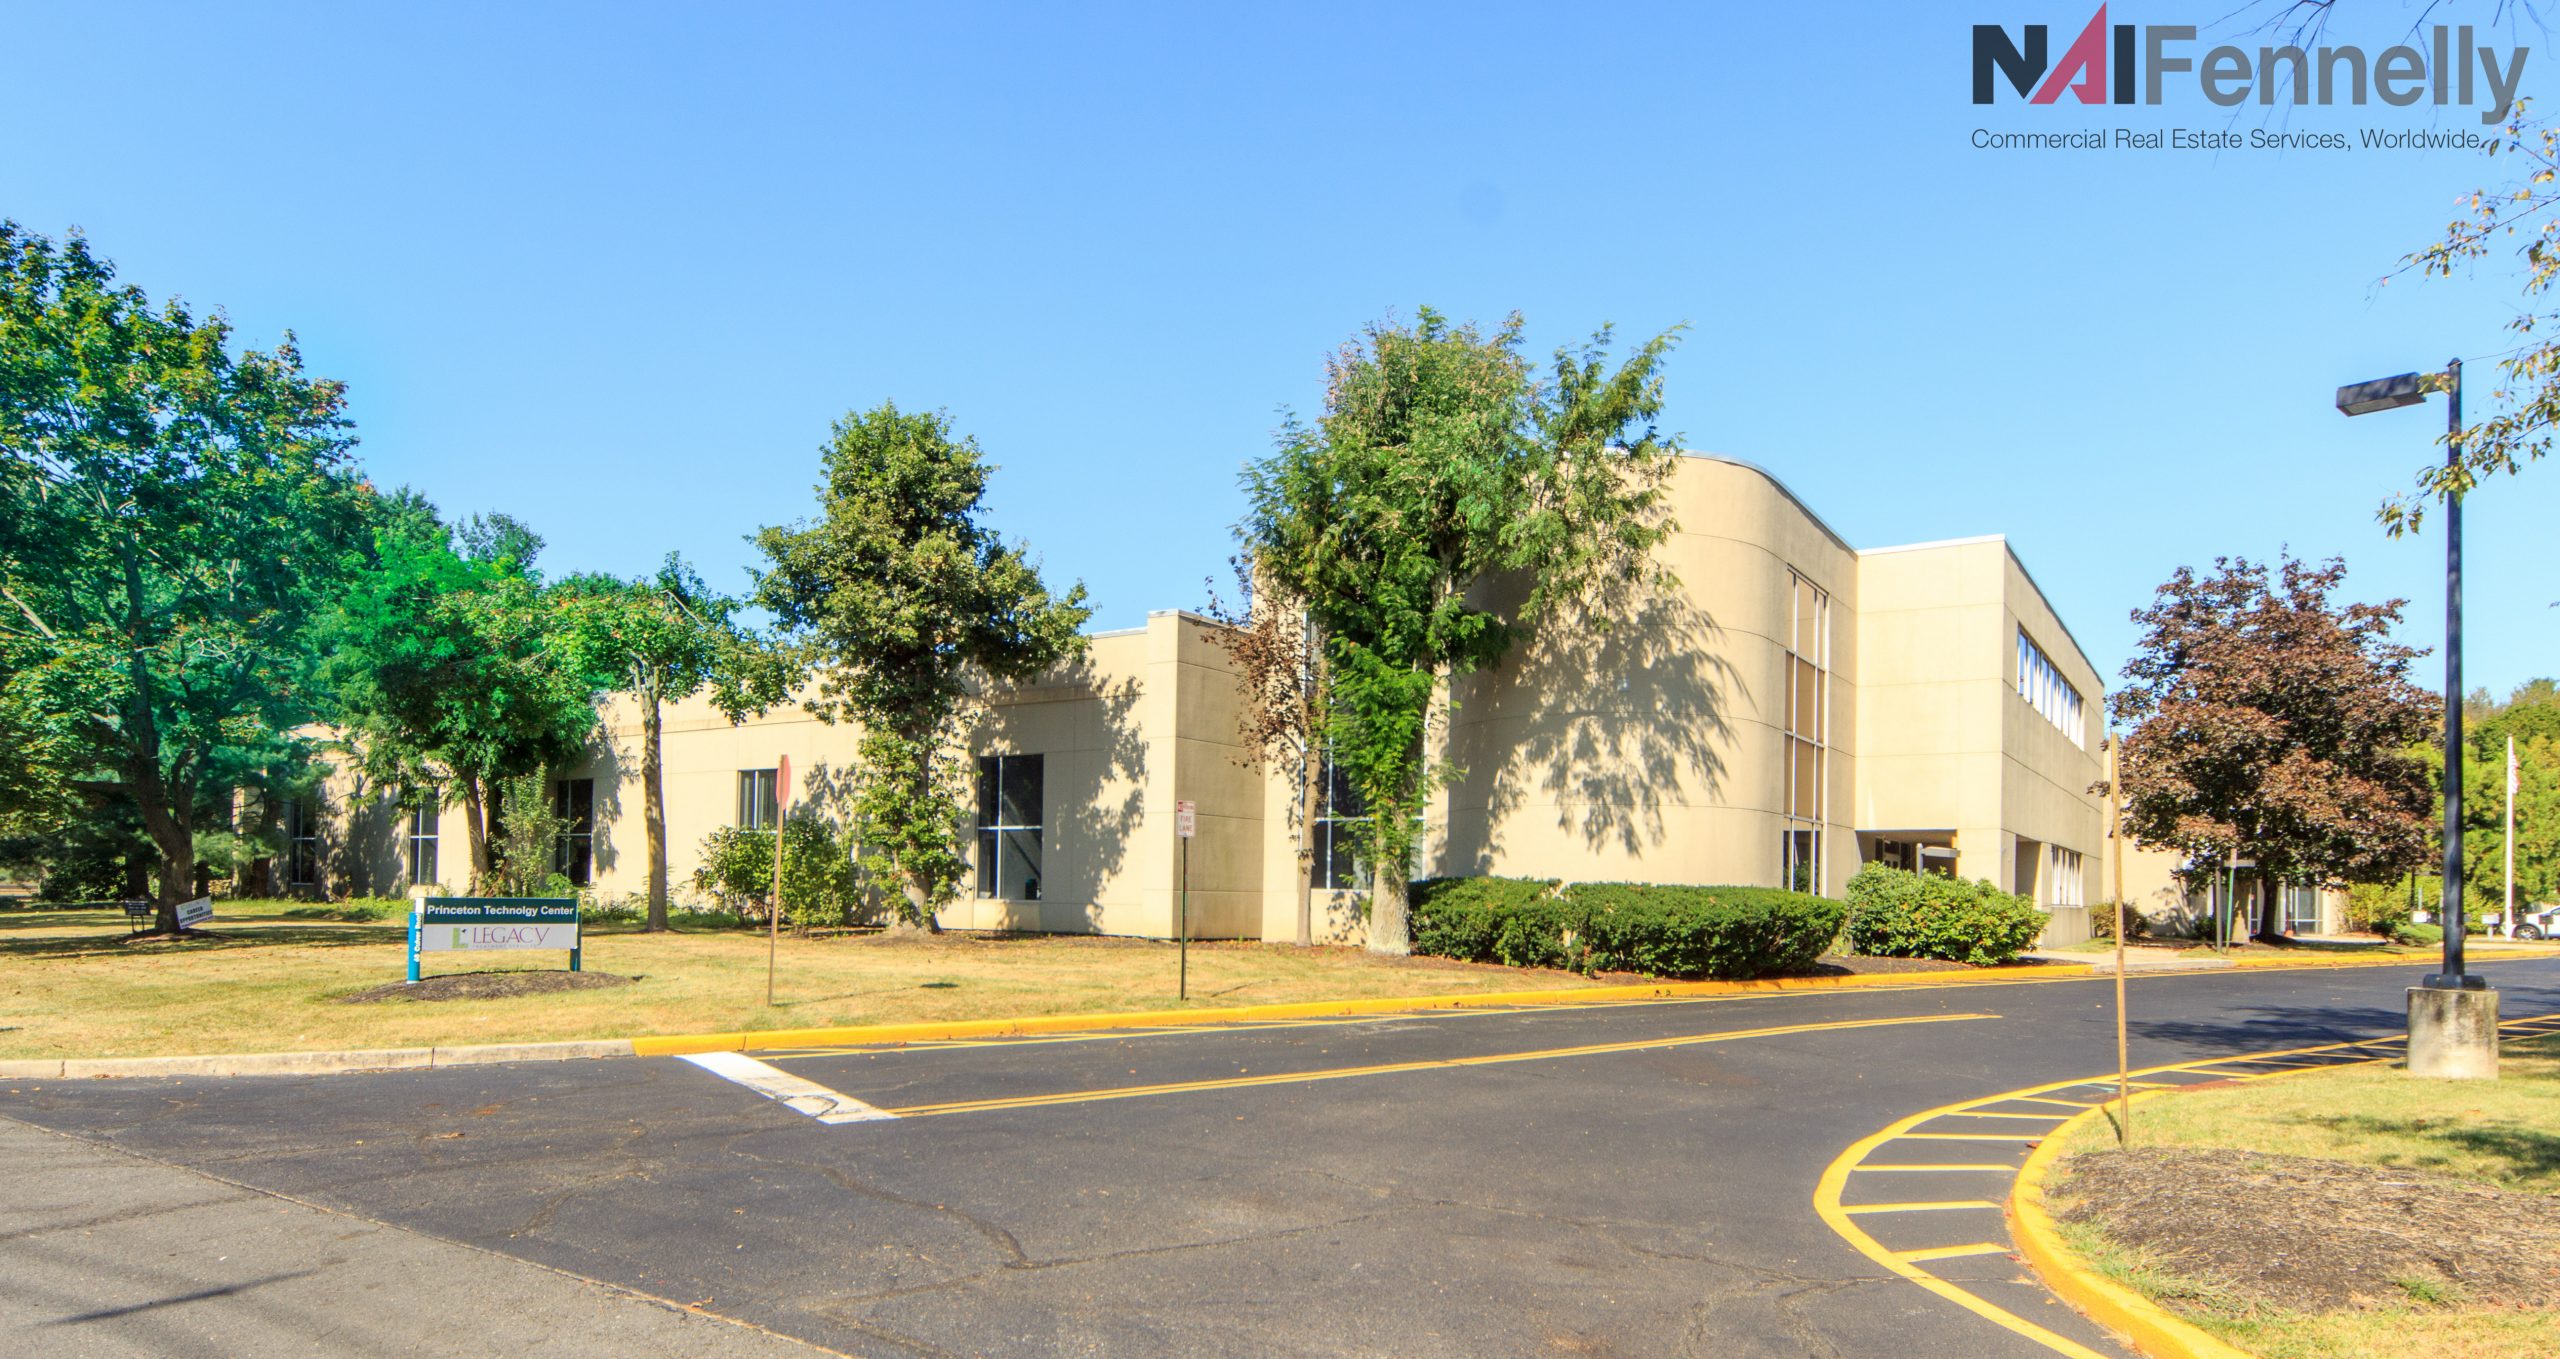 Fennelly Inks $5.575 Million Sale of 58,000-Square-Foot Flex Building in Monmouth Junction, N.J.